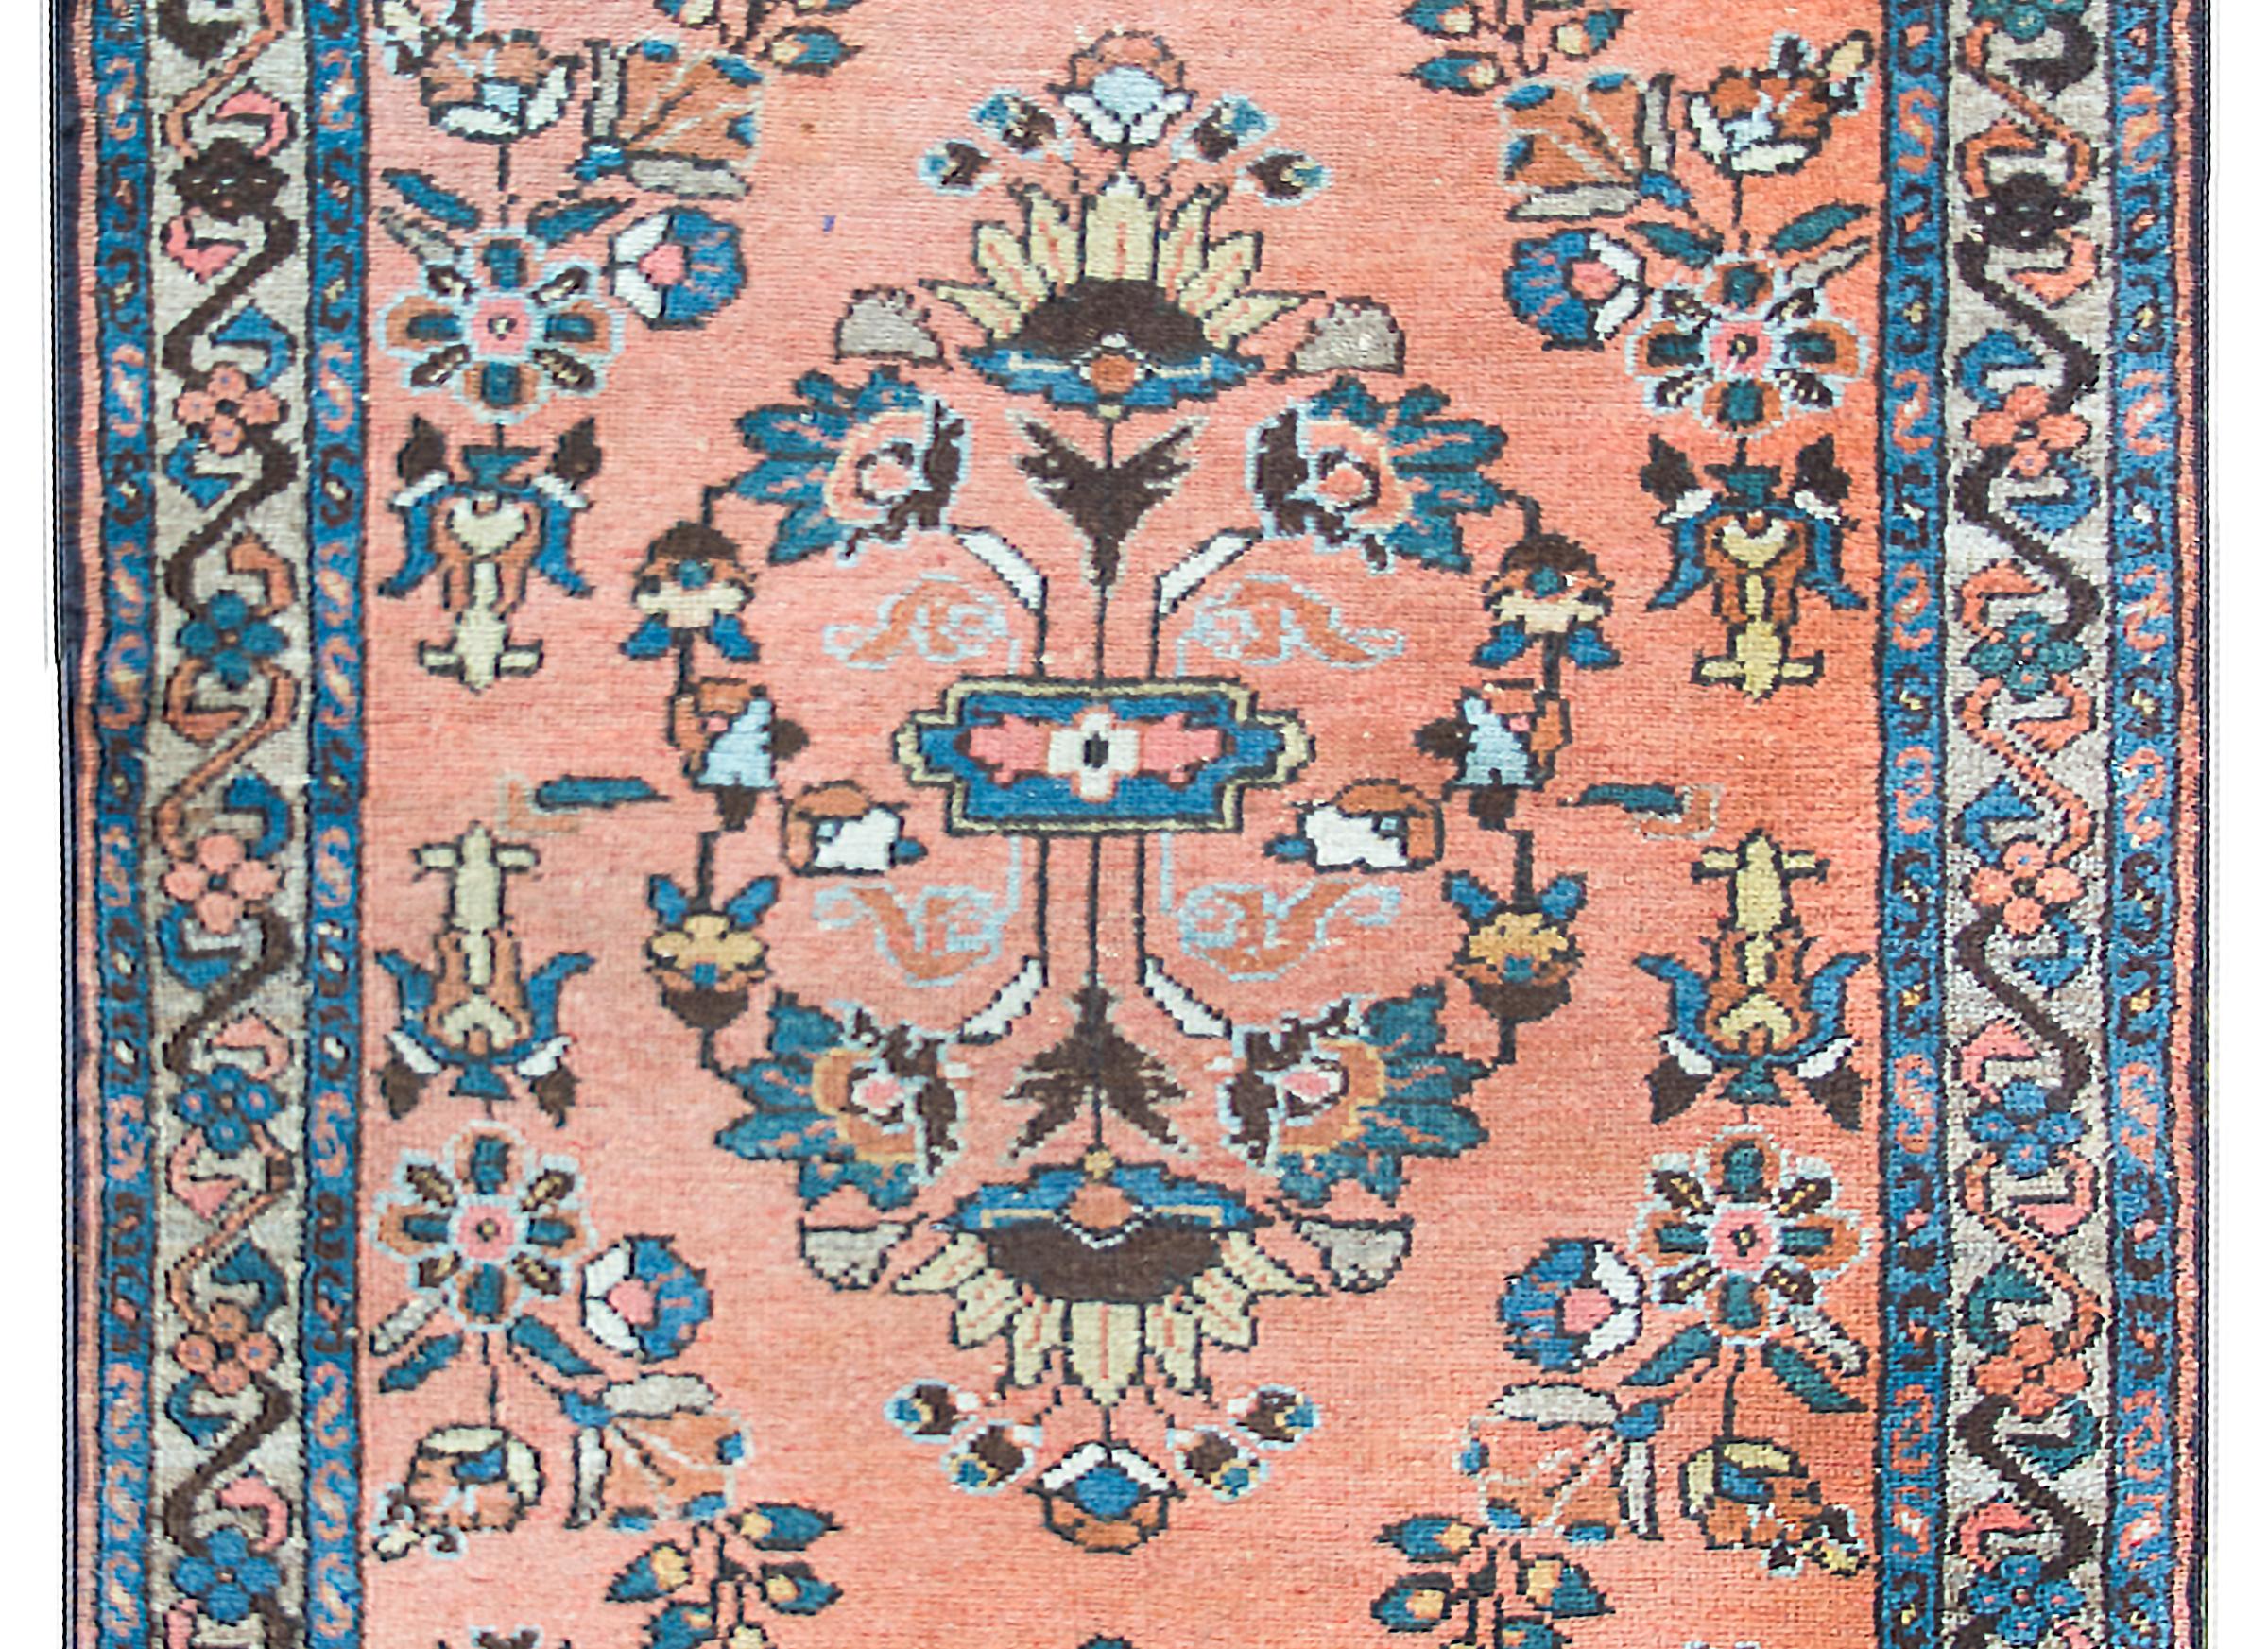 An early 20th century Persian Lilihan rug with a wonderfully rendered mirrored floral pattern woven in indigo, gold, cream, and pink, and set against a coral colored background, and surrounded by a border with stylized flowers and scrolling vines